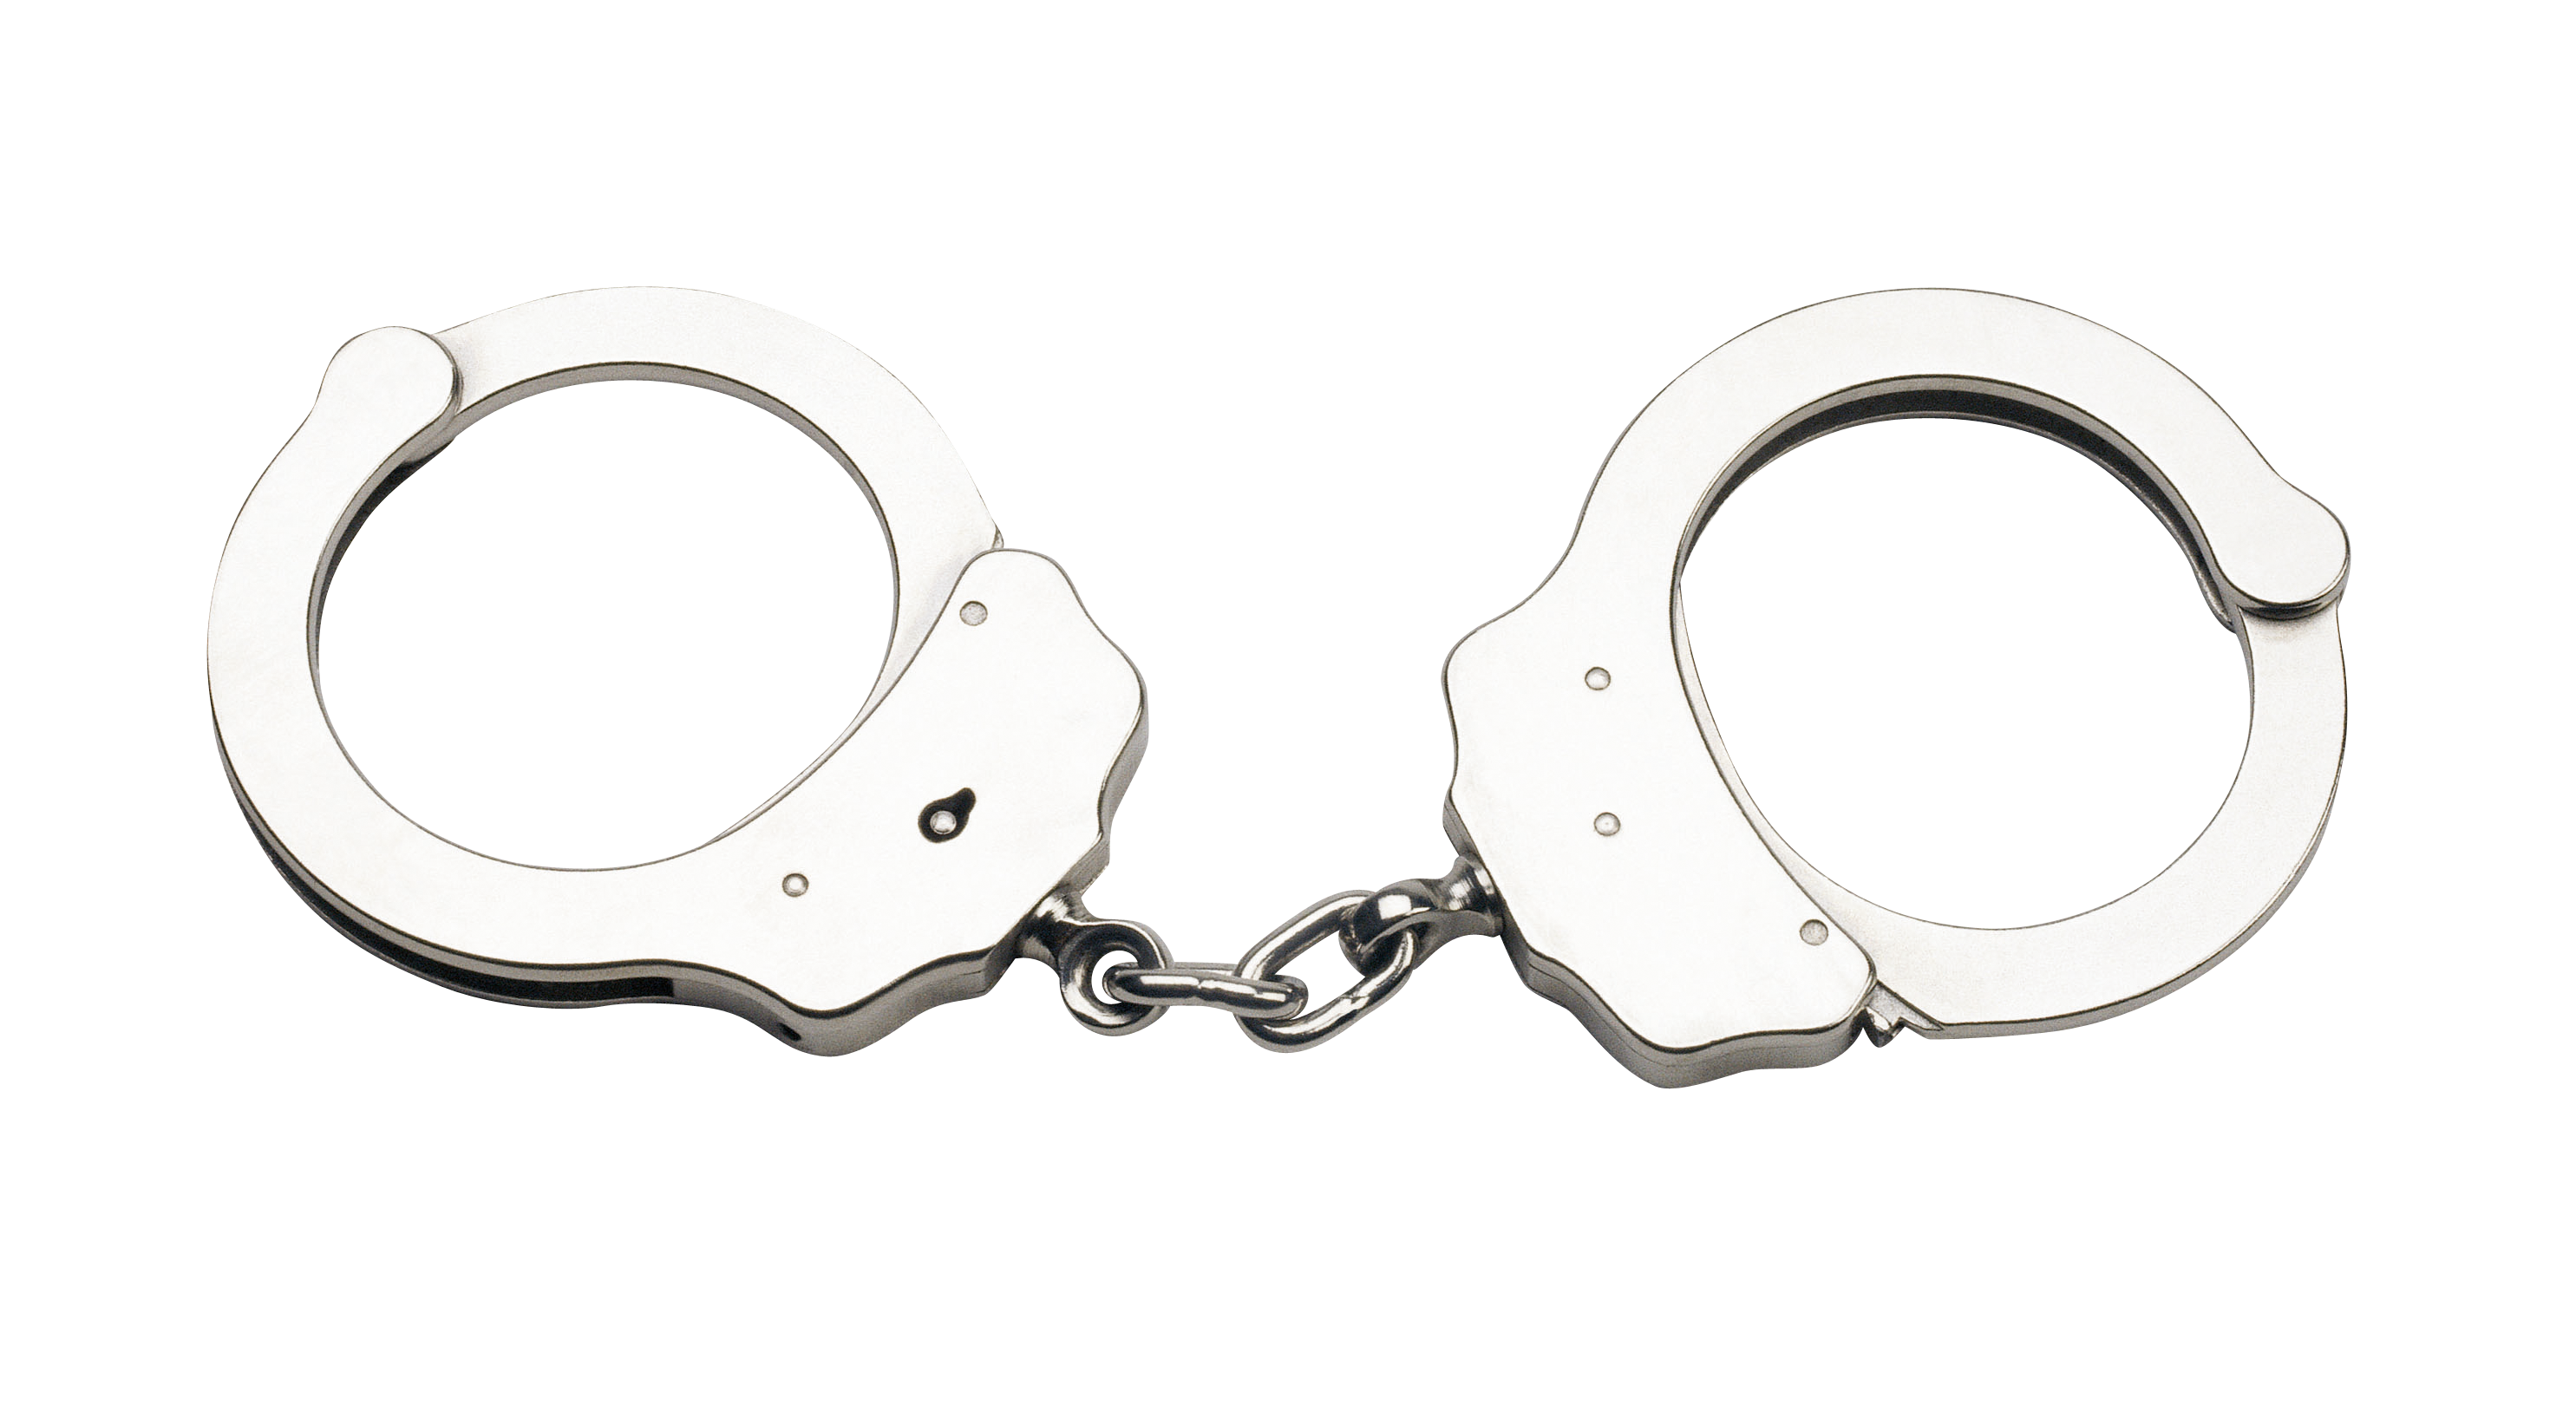 Handcuff clipart pink. Pictures of hand cuffs